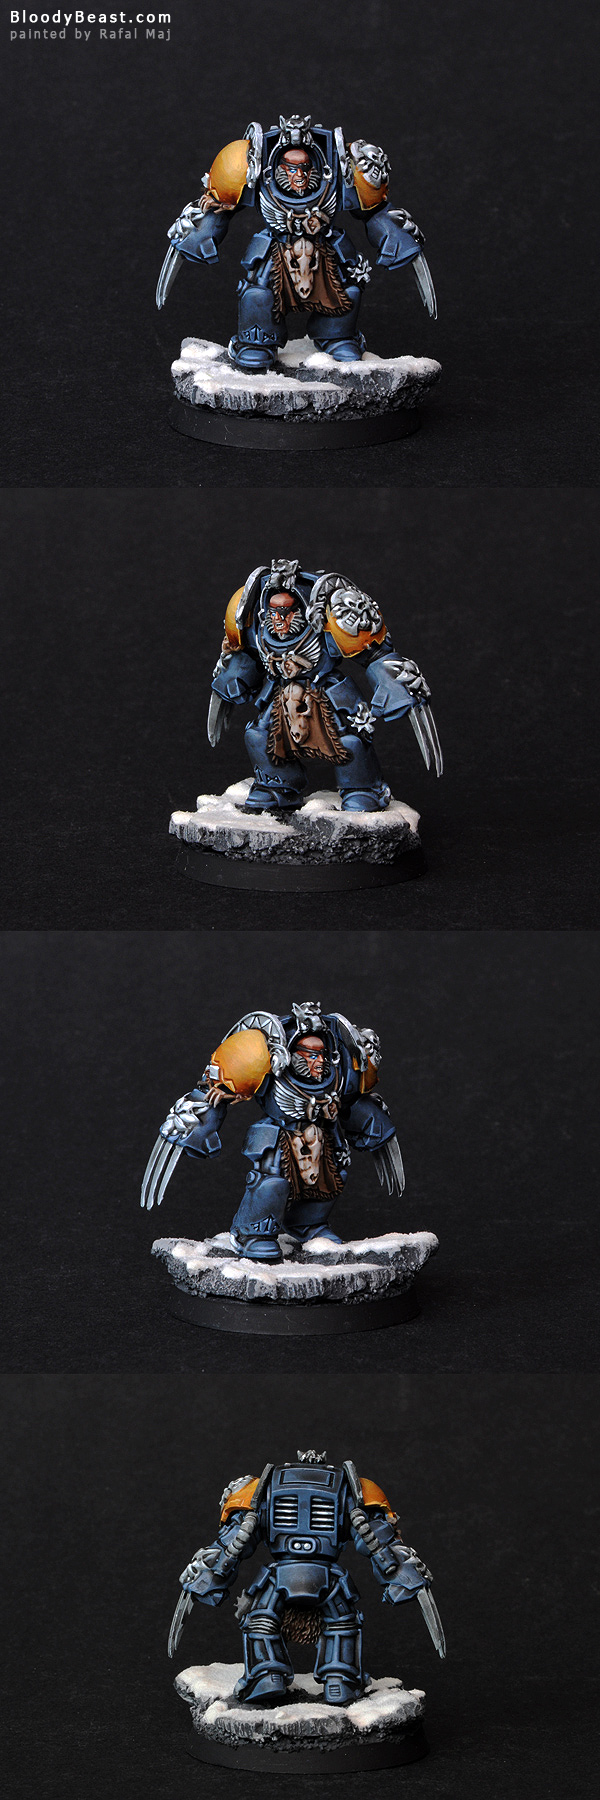 Space Wolves Guard with Wolf Claws painted by Rafal Maj (BloodyBeast.com)